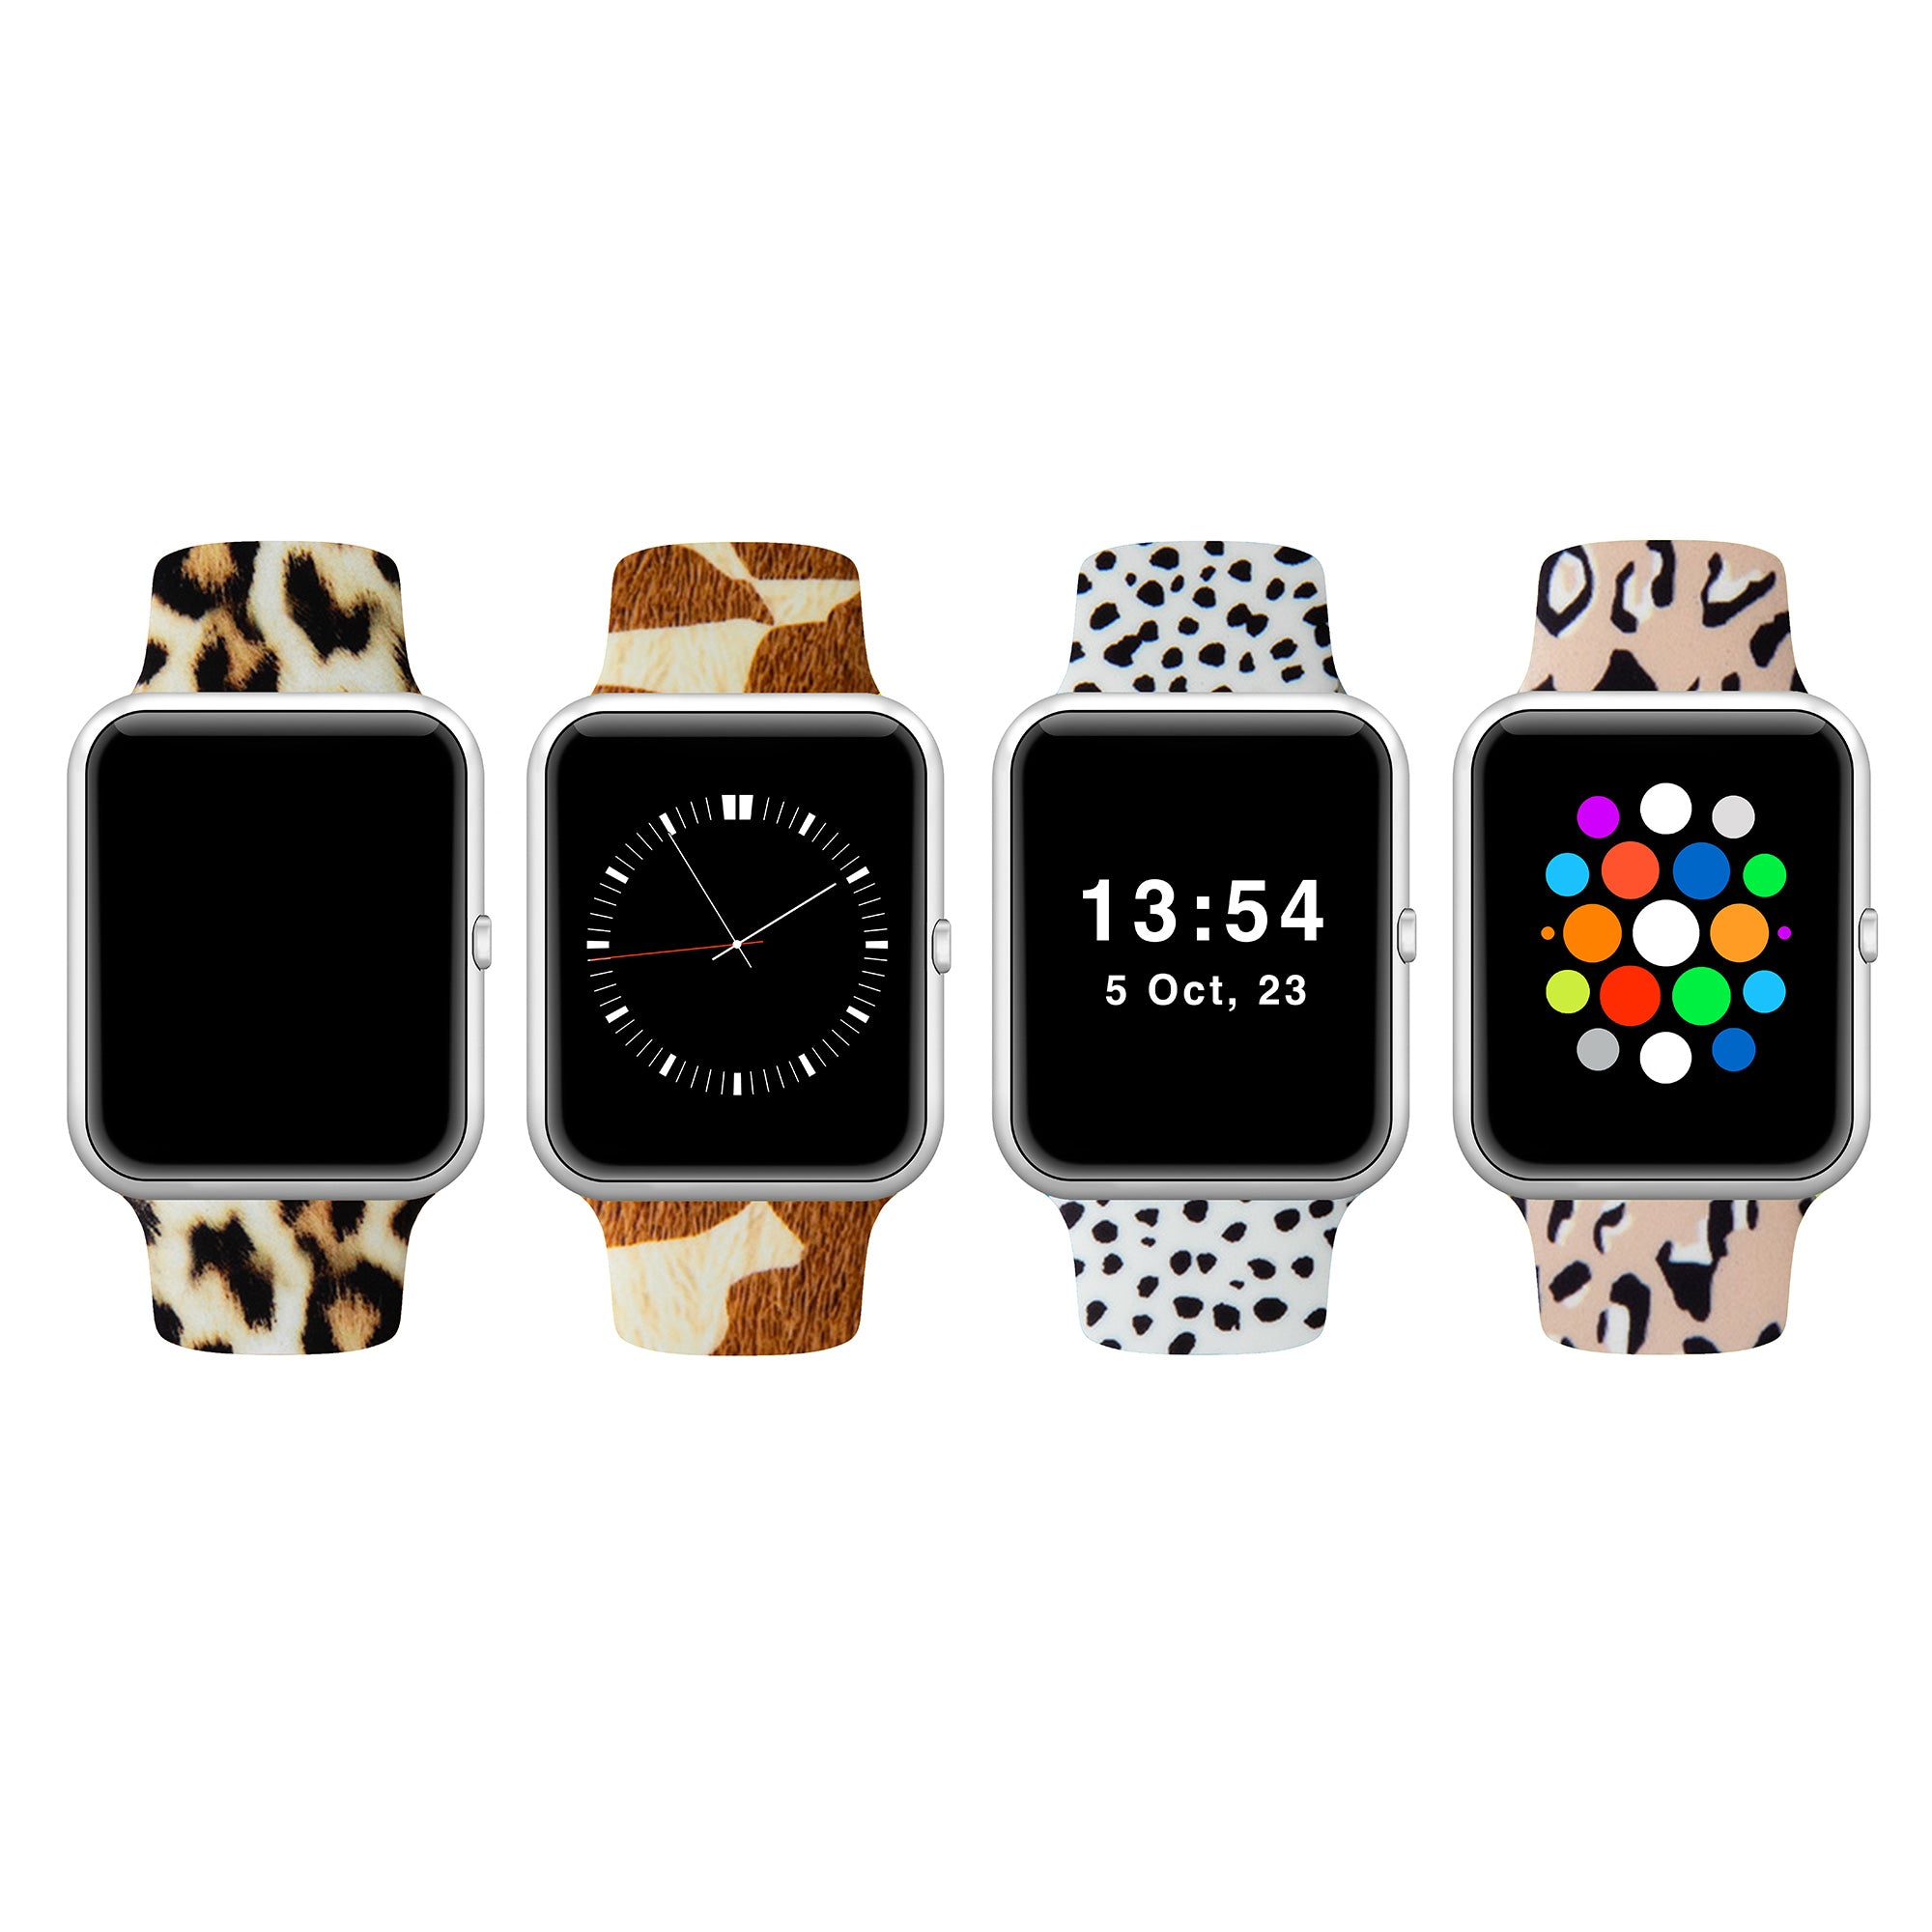 Patterned Silicone Apple Watch Band 38mm/40mm 42mm/44mm - Rainbow Tie-Dye - 42mm/44mm